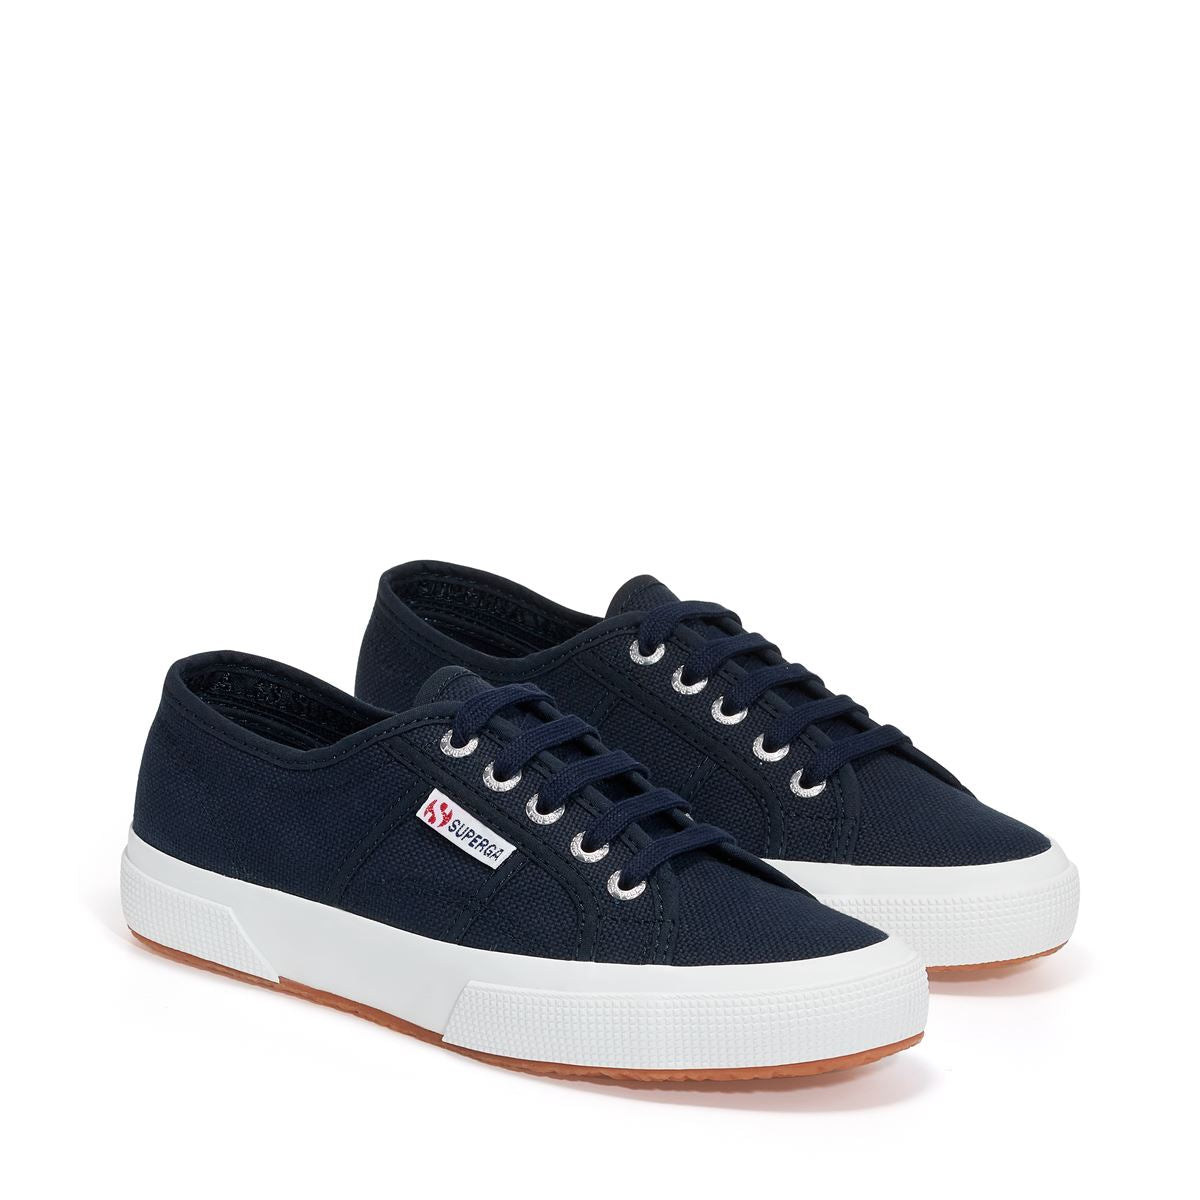 2750 Cotu Classic Sneakers Navy- Hover Image